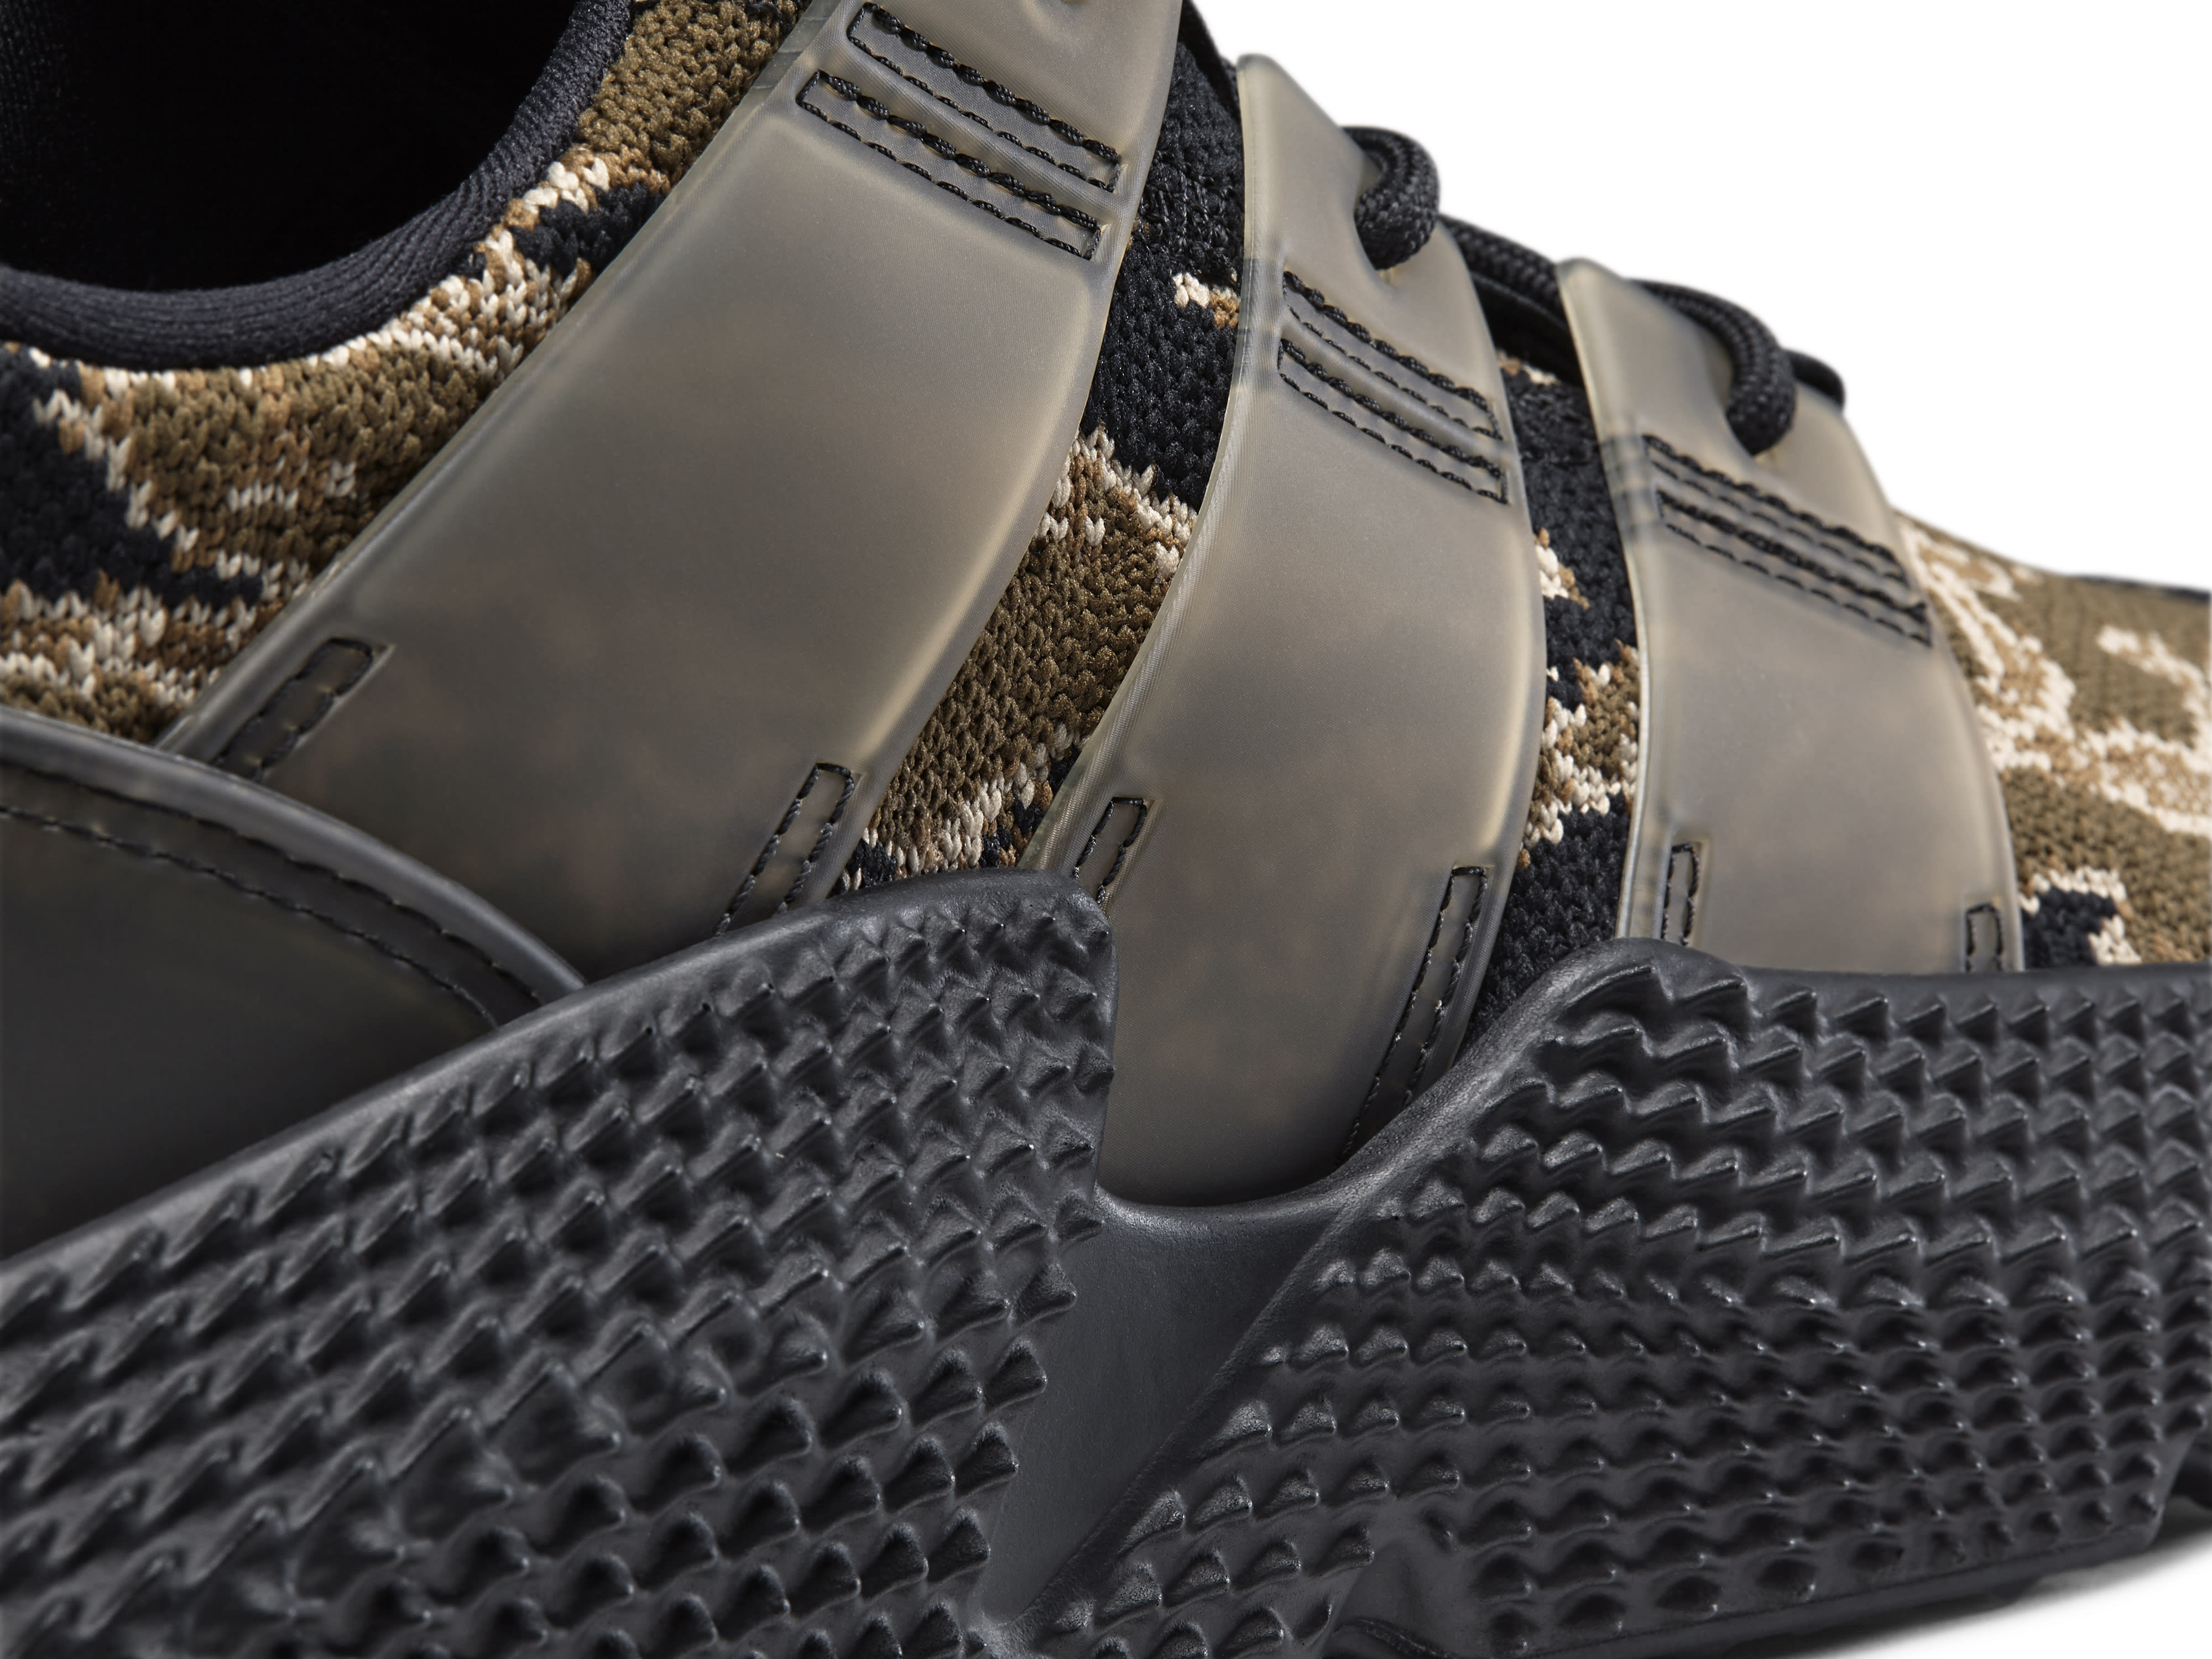 UNDFTD x Adidas Prophere Core Black/Trace Olive-Raw Gold AC8198 (Detail)